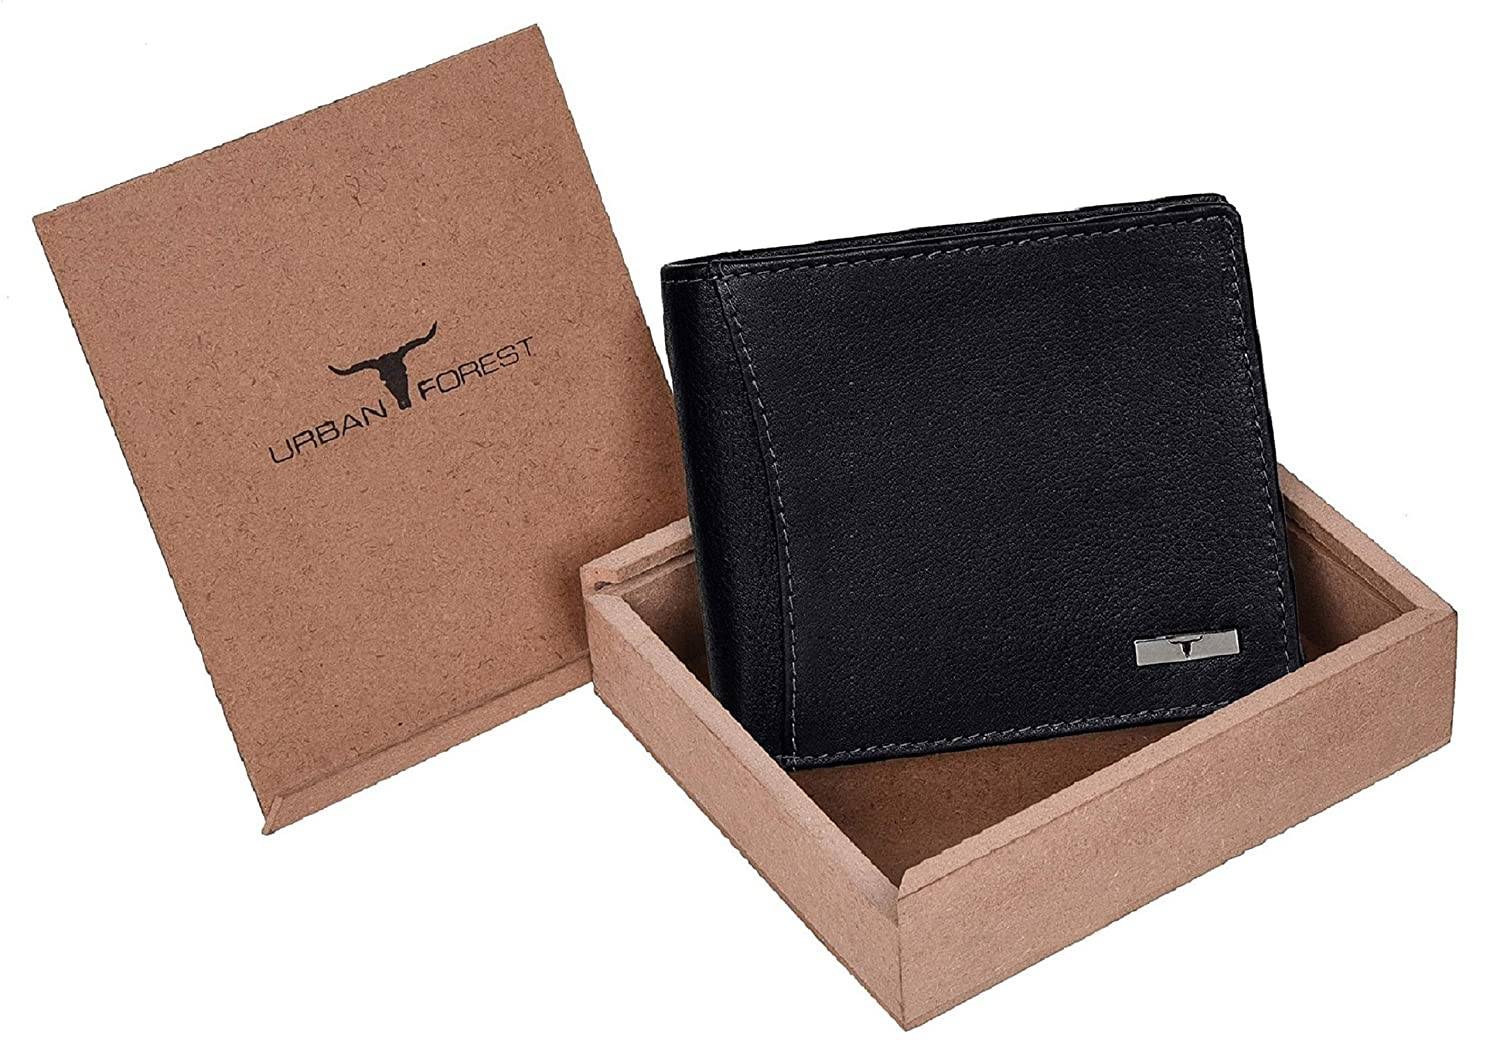 HIDE & SKIN Manchester Genuine Leather Wallet With Detachable Card Case for  Men - Hide and Skin